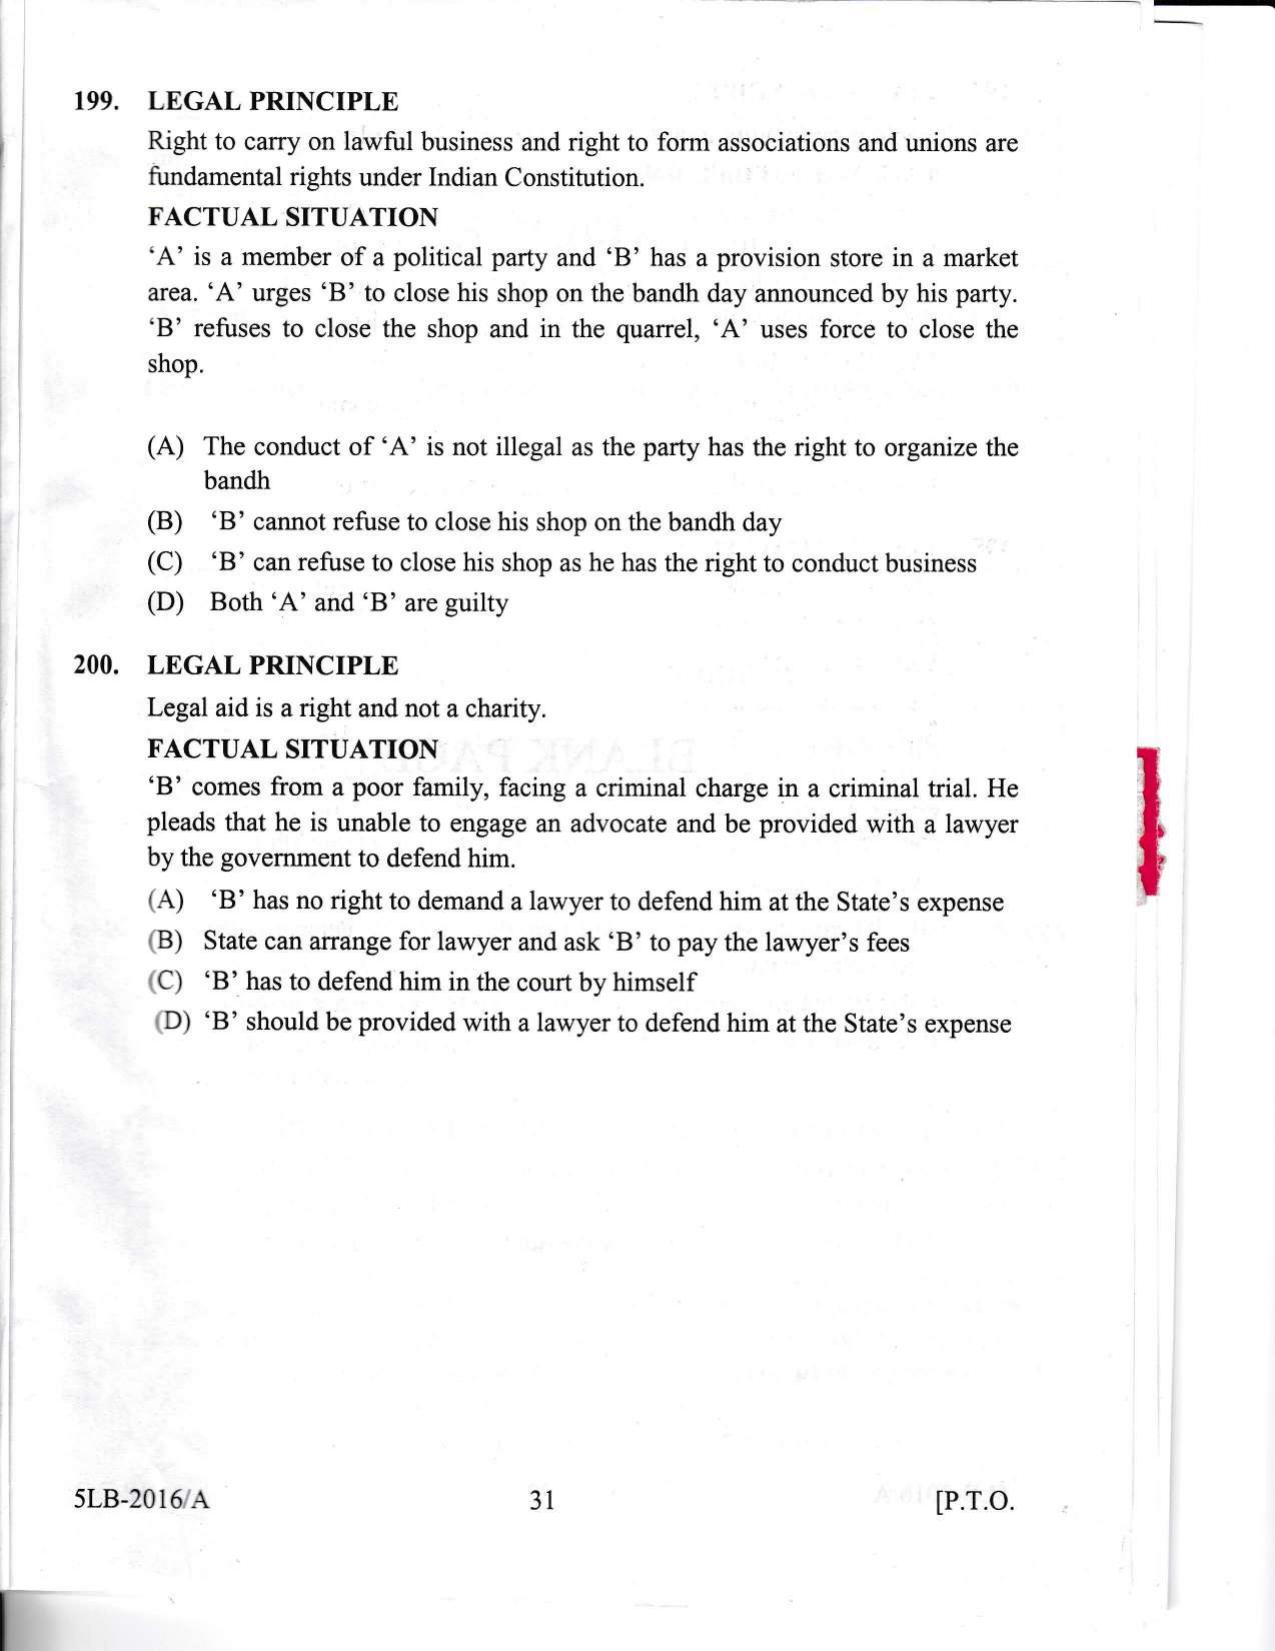 KLEE 5 Year LLB Exam 2016 Question Paper - Page 31